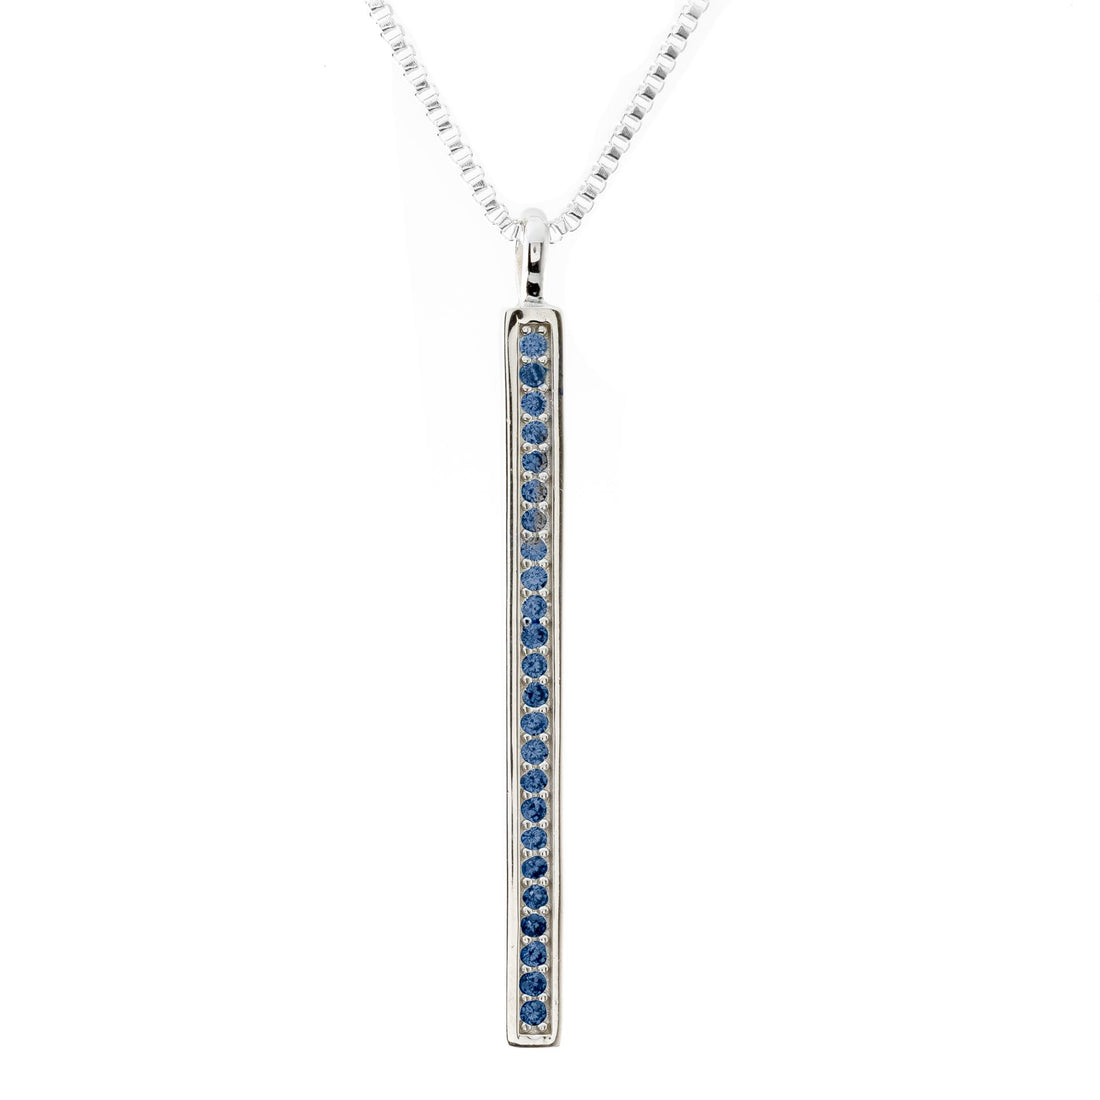 Solid Bar Navy Blue Rhinestone Sterling Silver Pendant With Triple Rhodium Coating (2 1/2 inch Long) Default Title